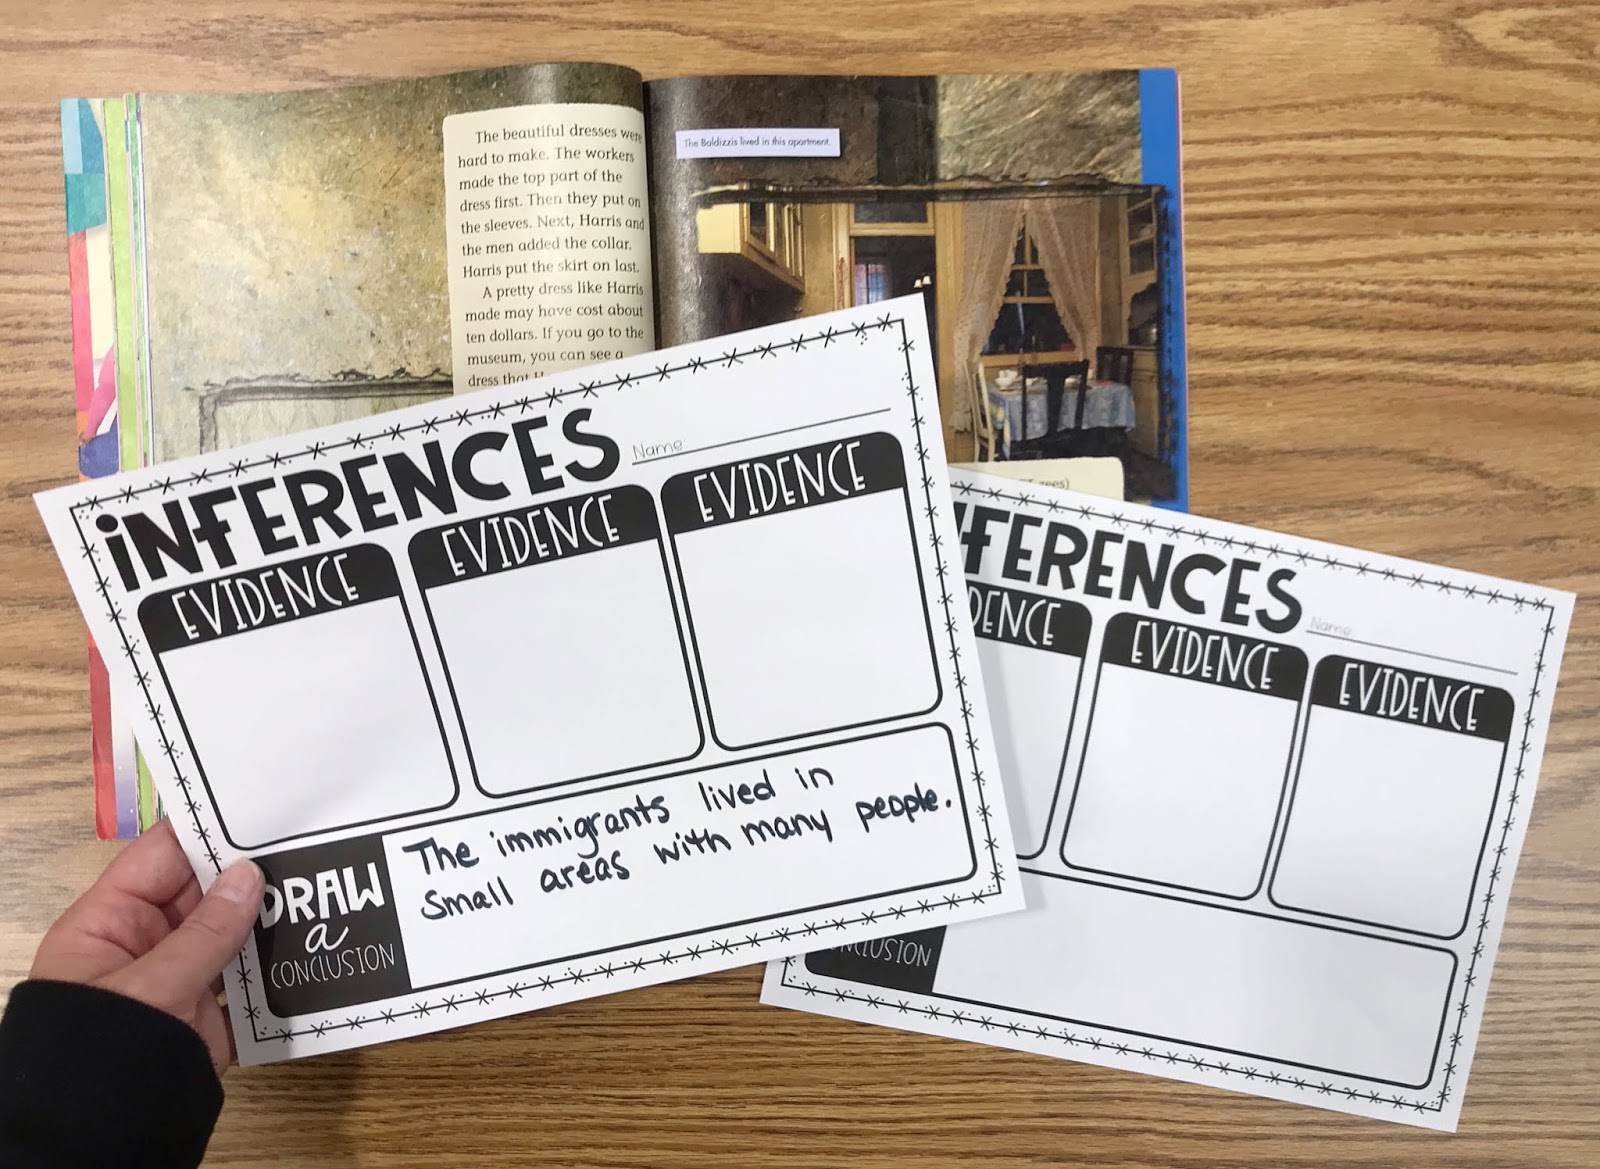 Social Studies book  with Graphic Organizer with text "Inferences "